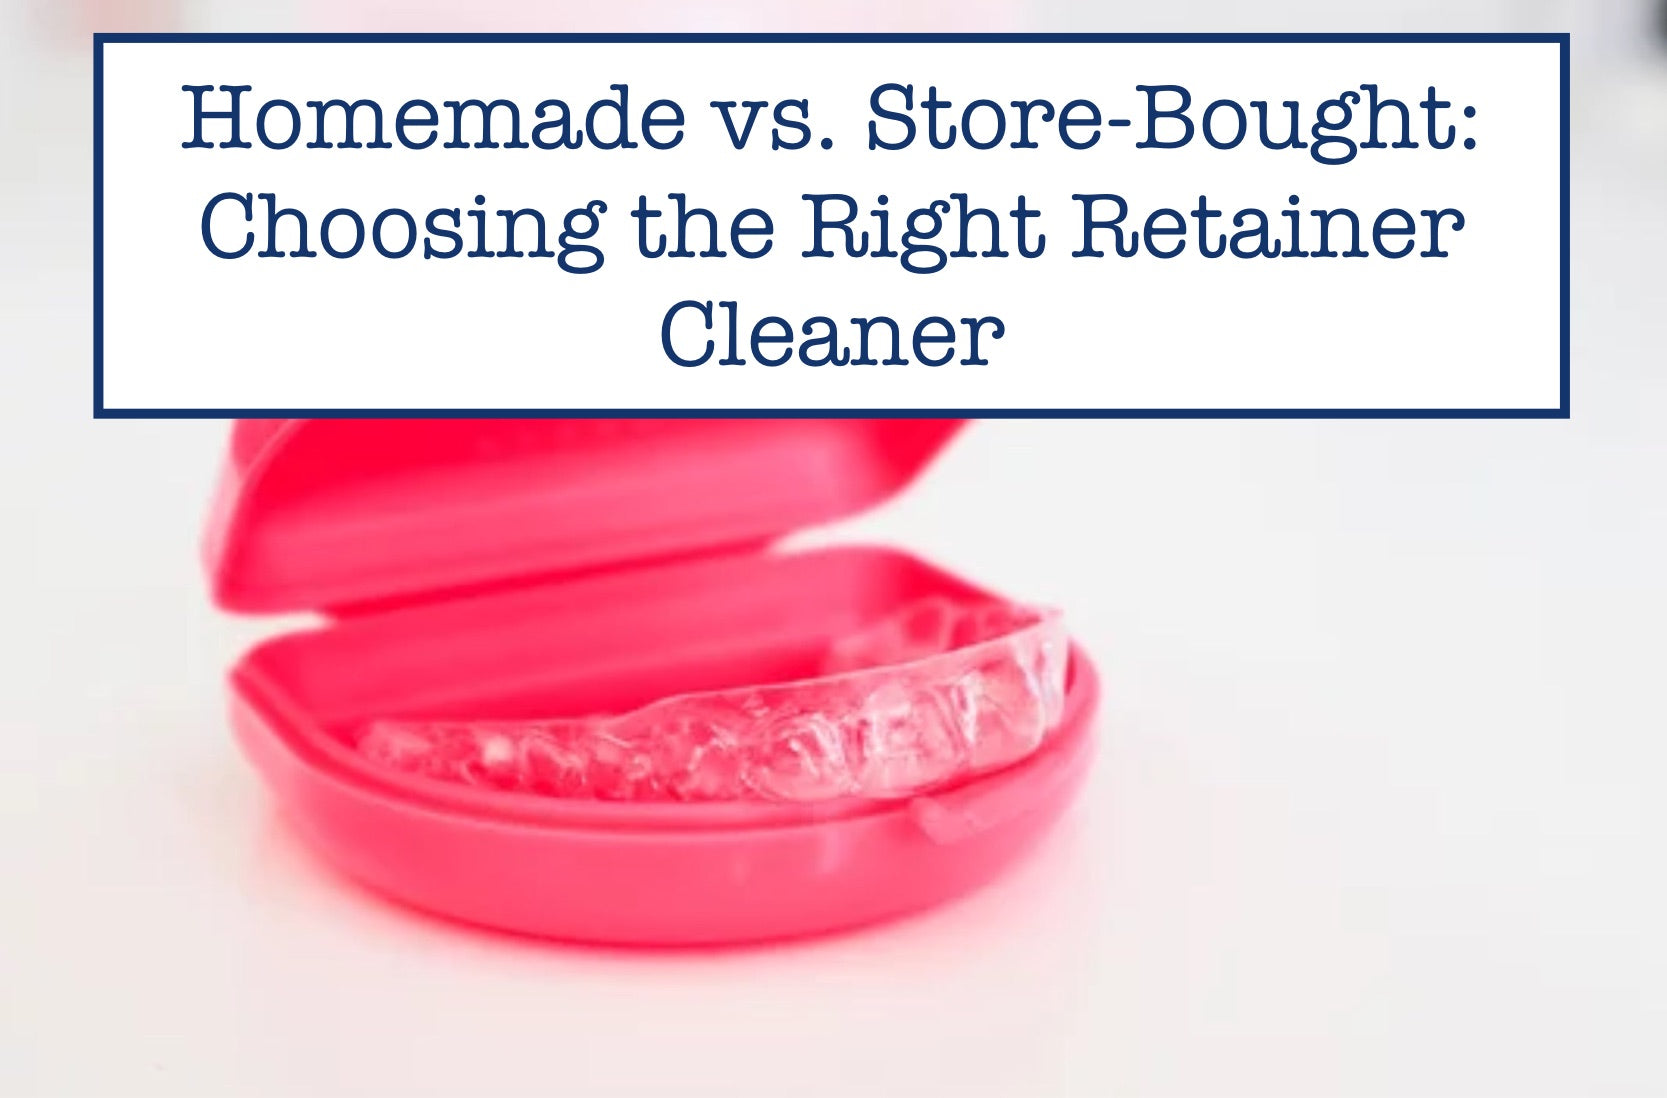 Homemade vs. Store-Bought: Choosing the Right Retainer Cleaner